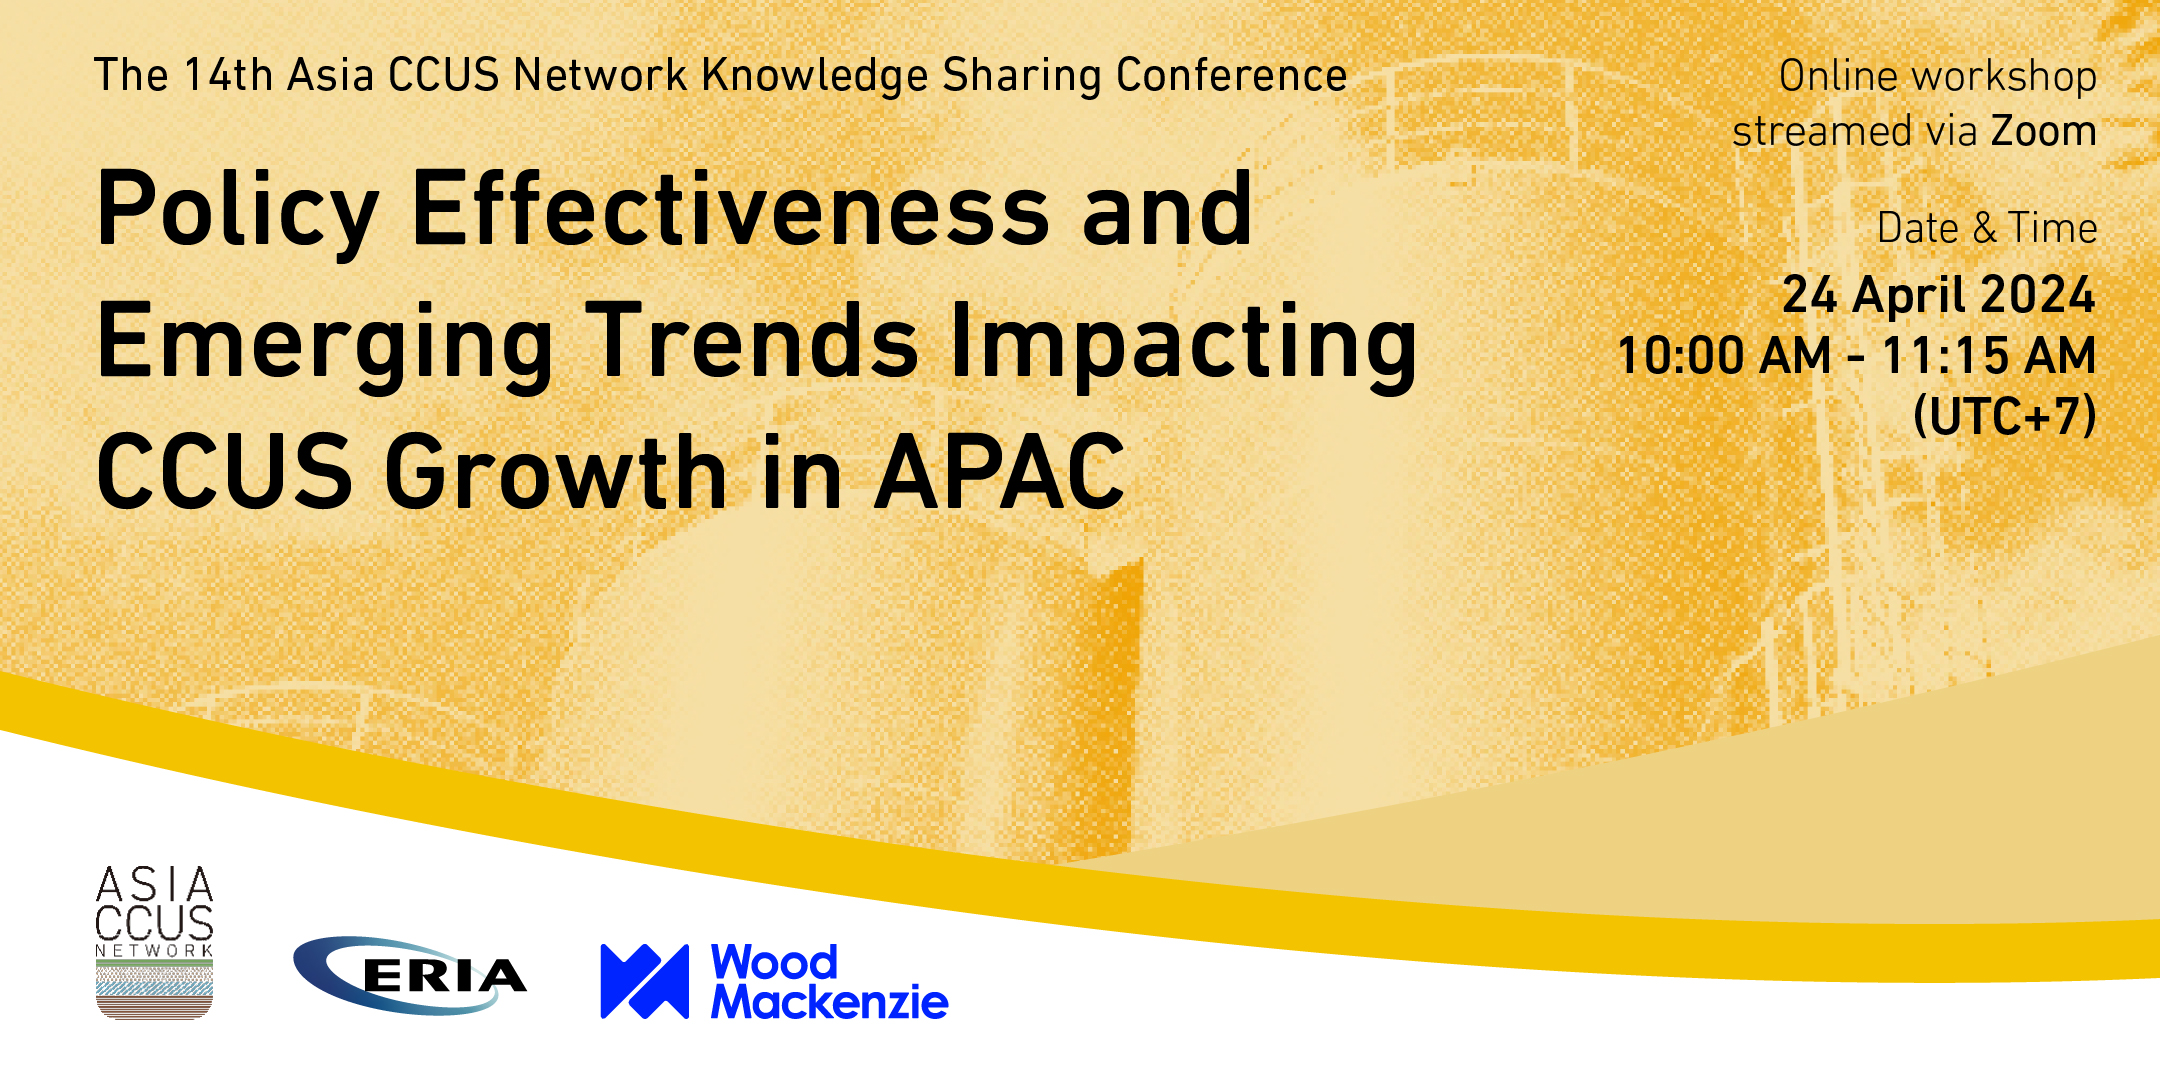 The 14th ACN Knowledge Sharing Conference: Policy Effectiveness and Emerging Trends Impacting CCUS Growth in APAC